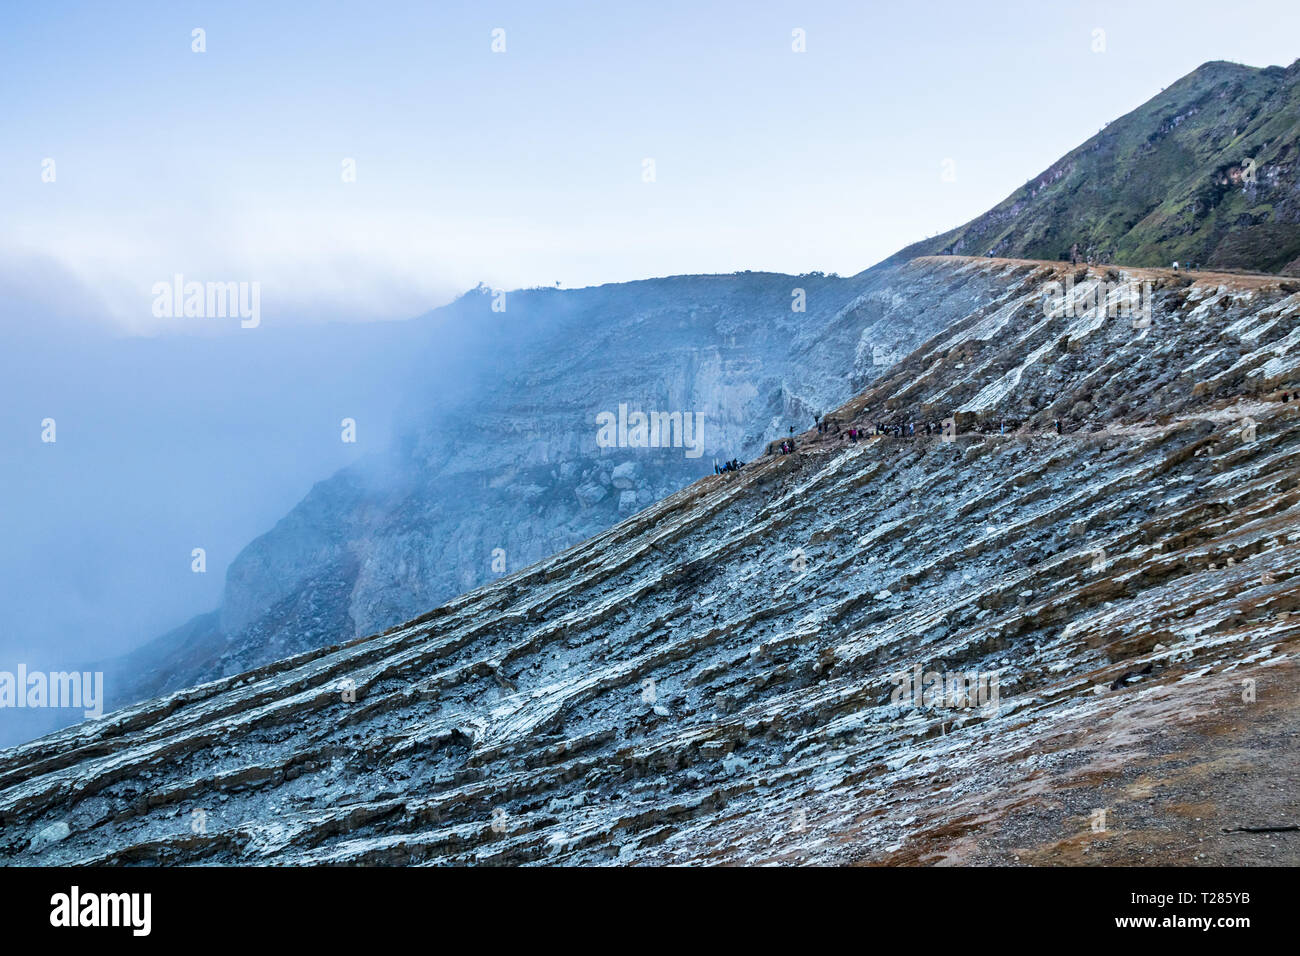 View of the Kawah Ijen volcano with toxic gases emerging from the bottom of the crater. Java, Indonesia. Stock Photo